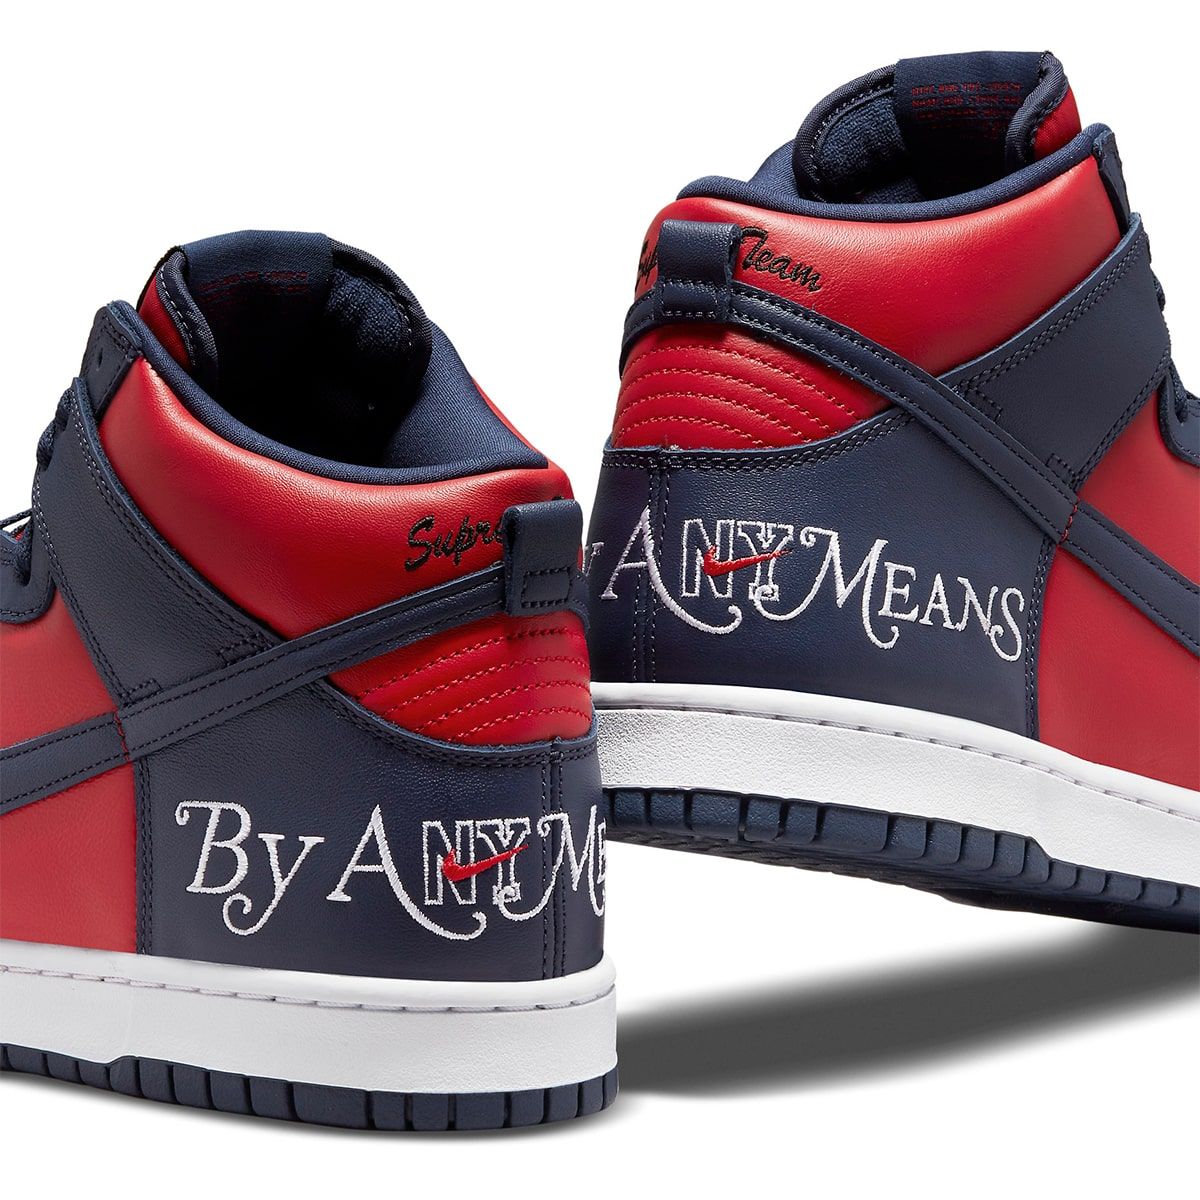 Supreme nike sb black and red x Nike SB Dunk High “By Any Means” Collection Releases